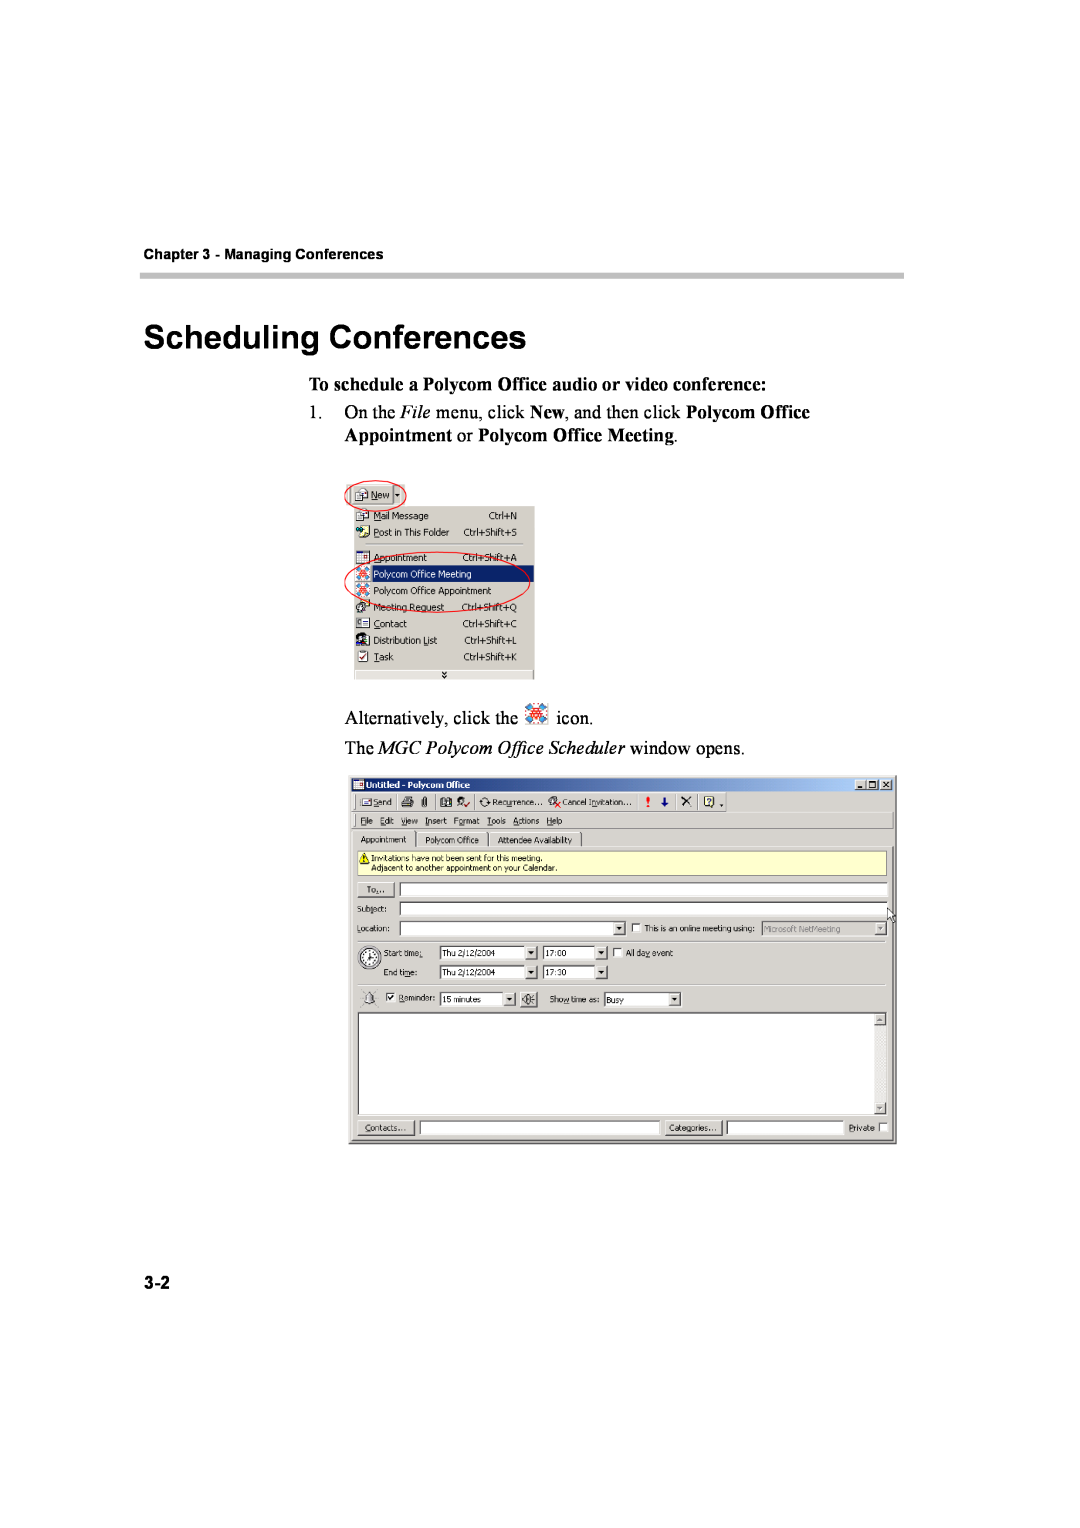 Polycom 8 quick start Scheduling Conferences, The MGC Polycom Office Scheduler window opens, Alternatively, click the icon 